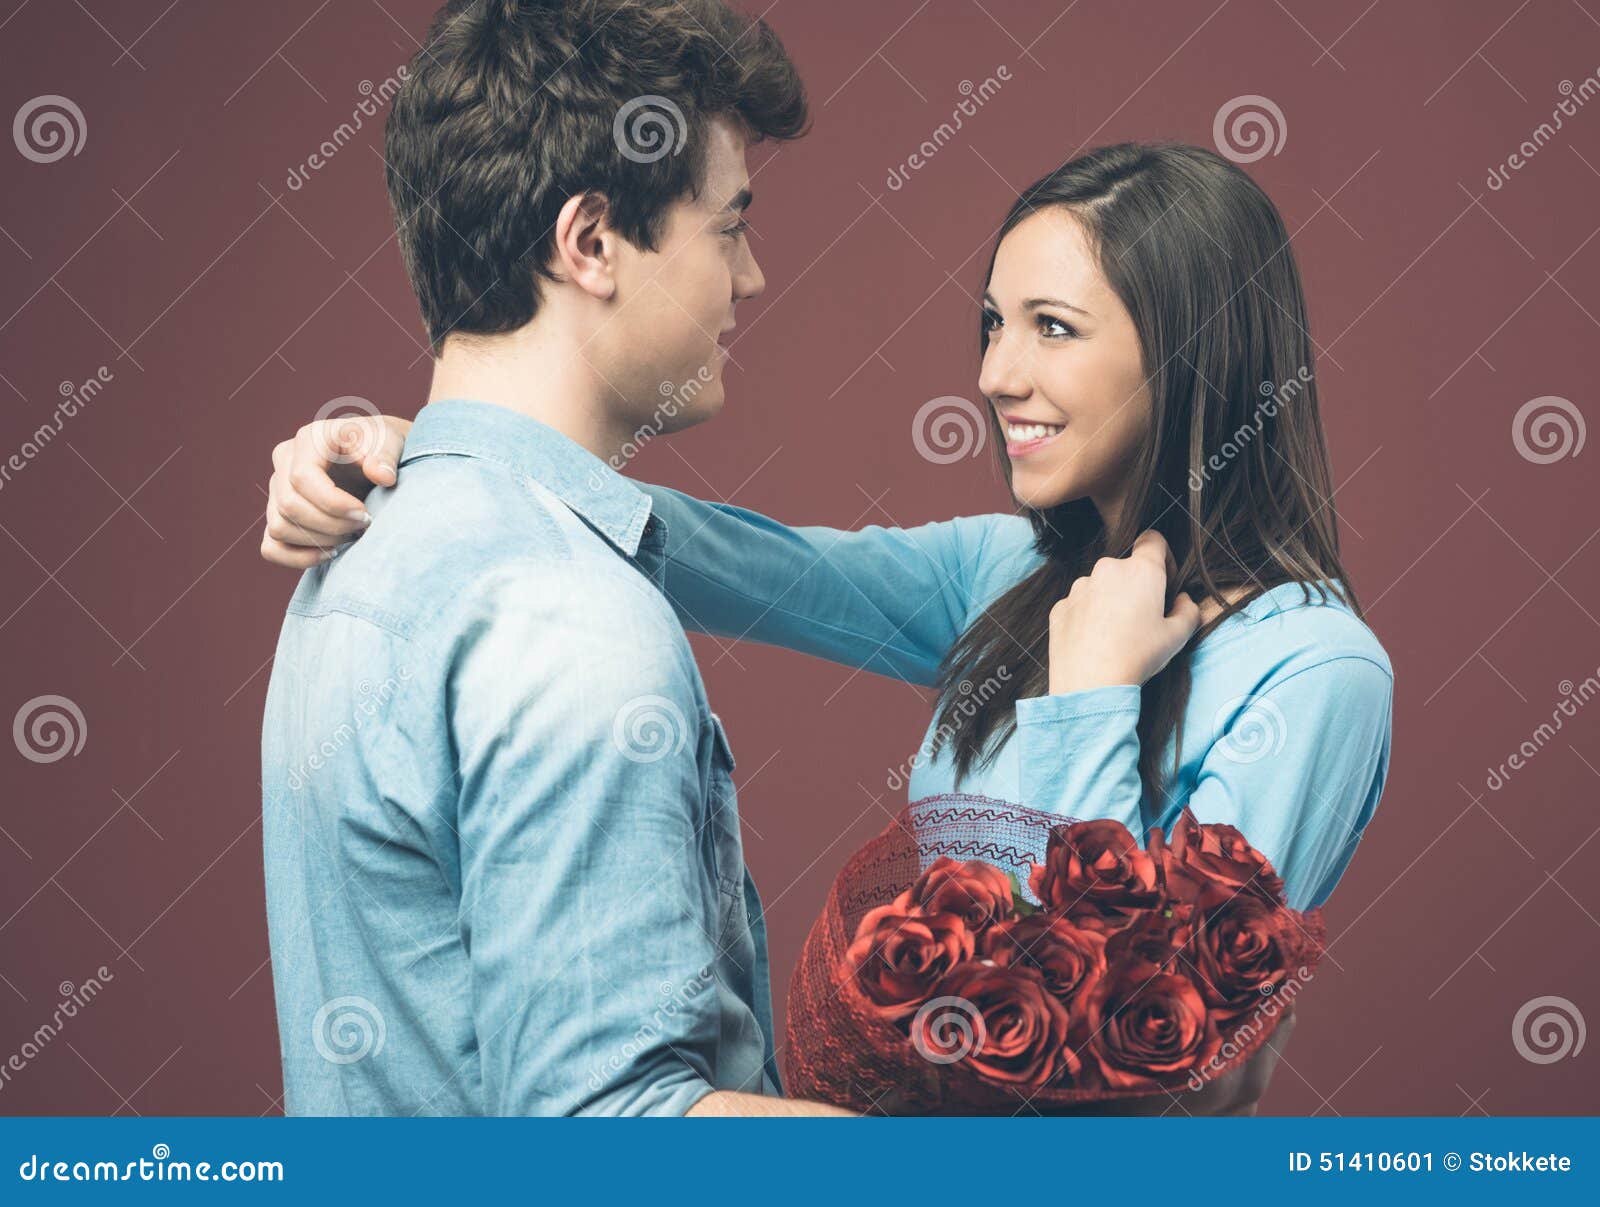 Smiling Woman Receiving a Love Gift Stock Image - Image of